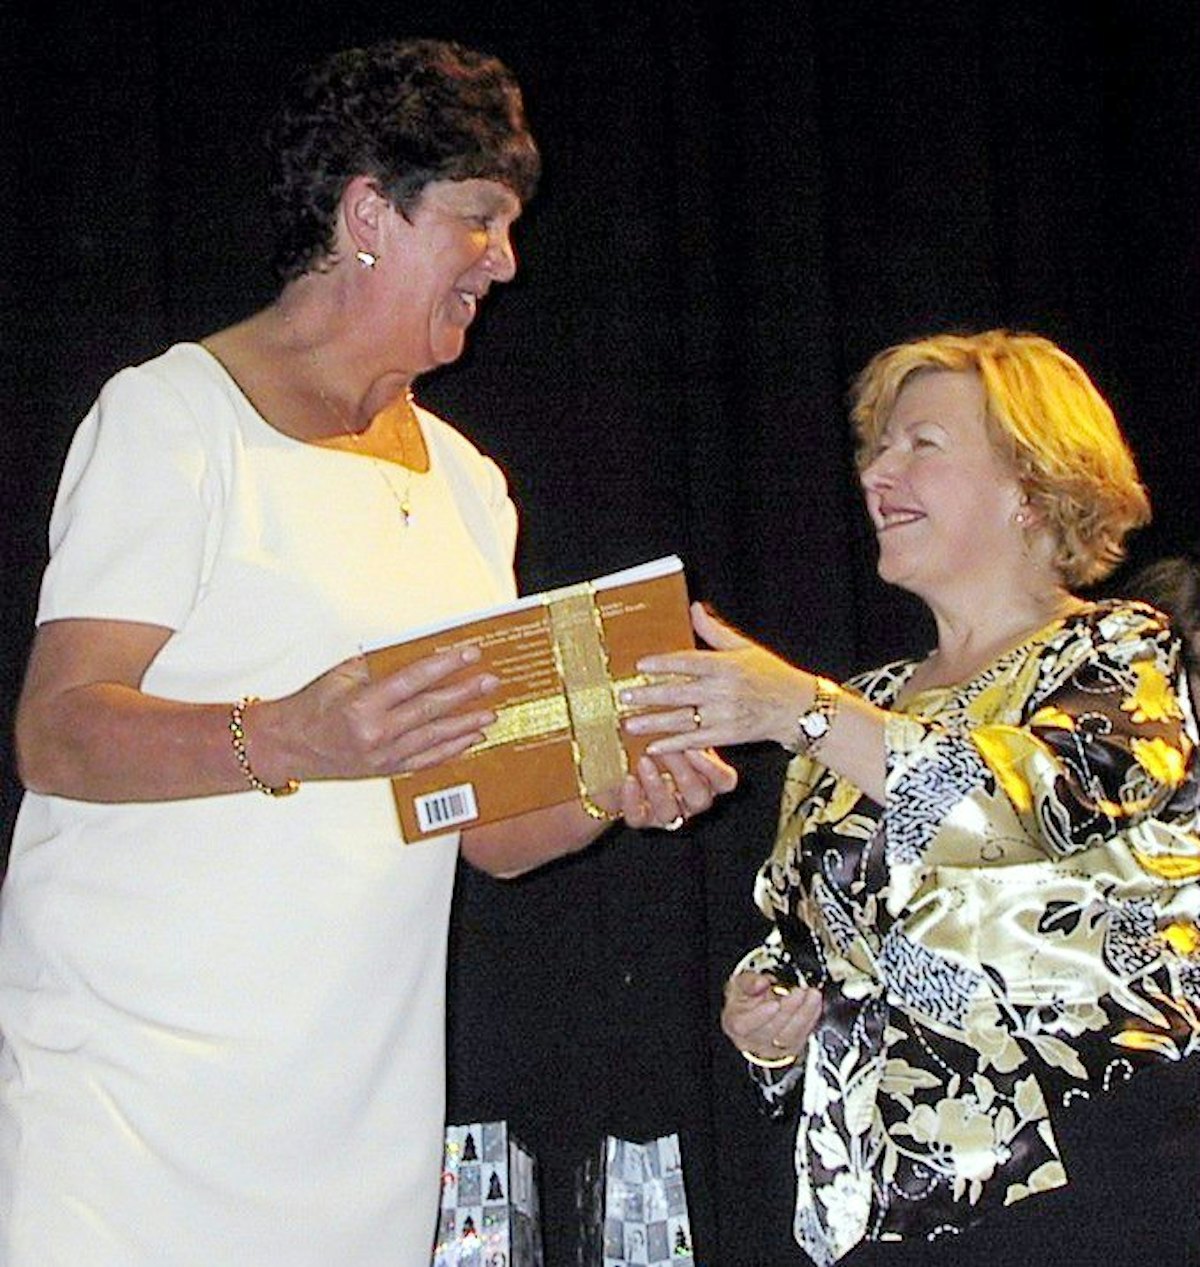 The Victorian state parliamentary secretary for education, Liz Beattie (right), presents a gift to Rose Walthers, the assistant principal of Bulleen Heights School in Manningham, Australia, at a teacher appreciation event organized by the local Baha'i community.